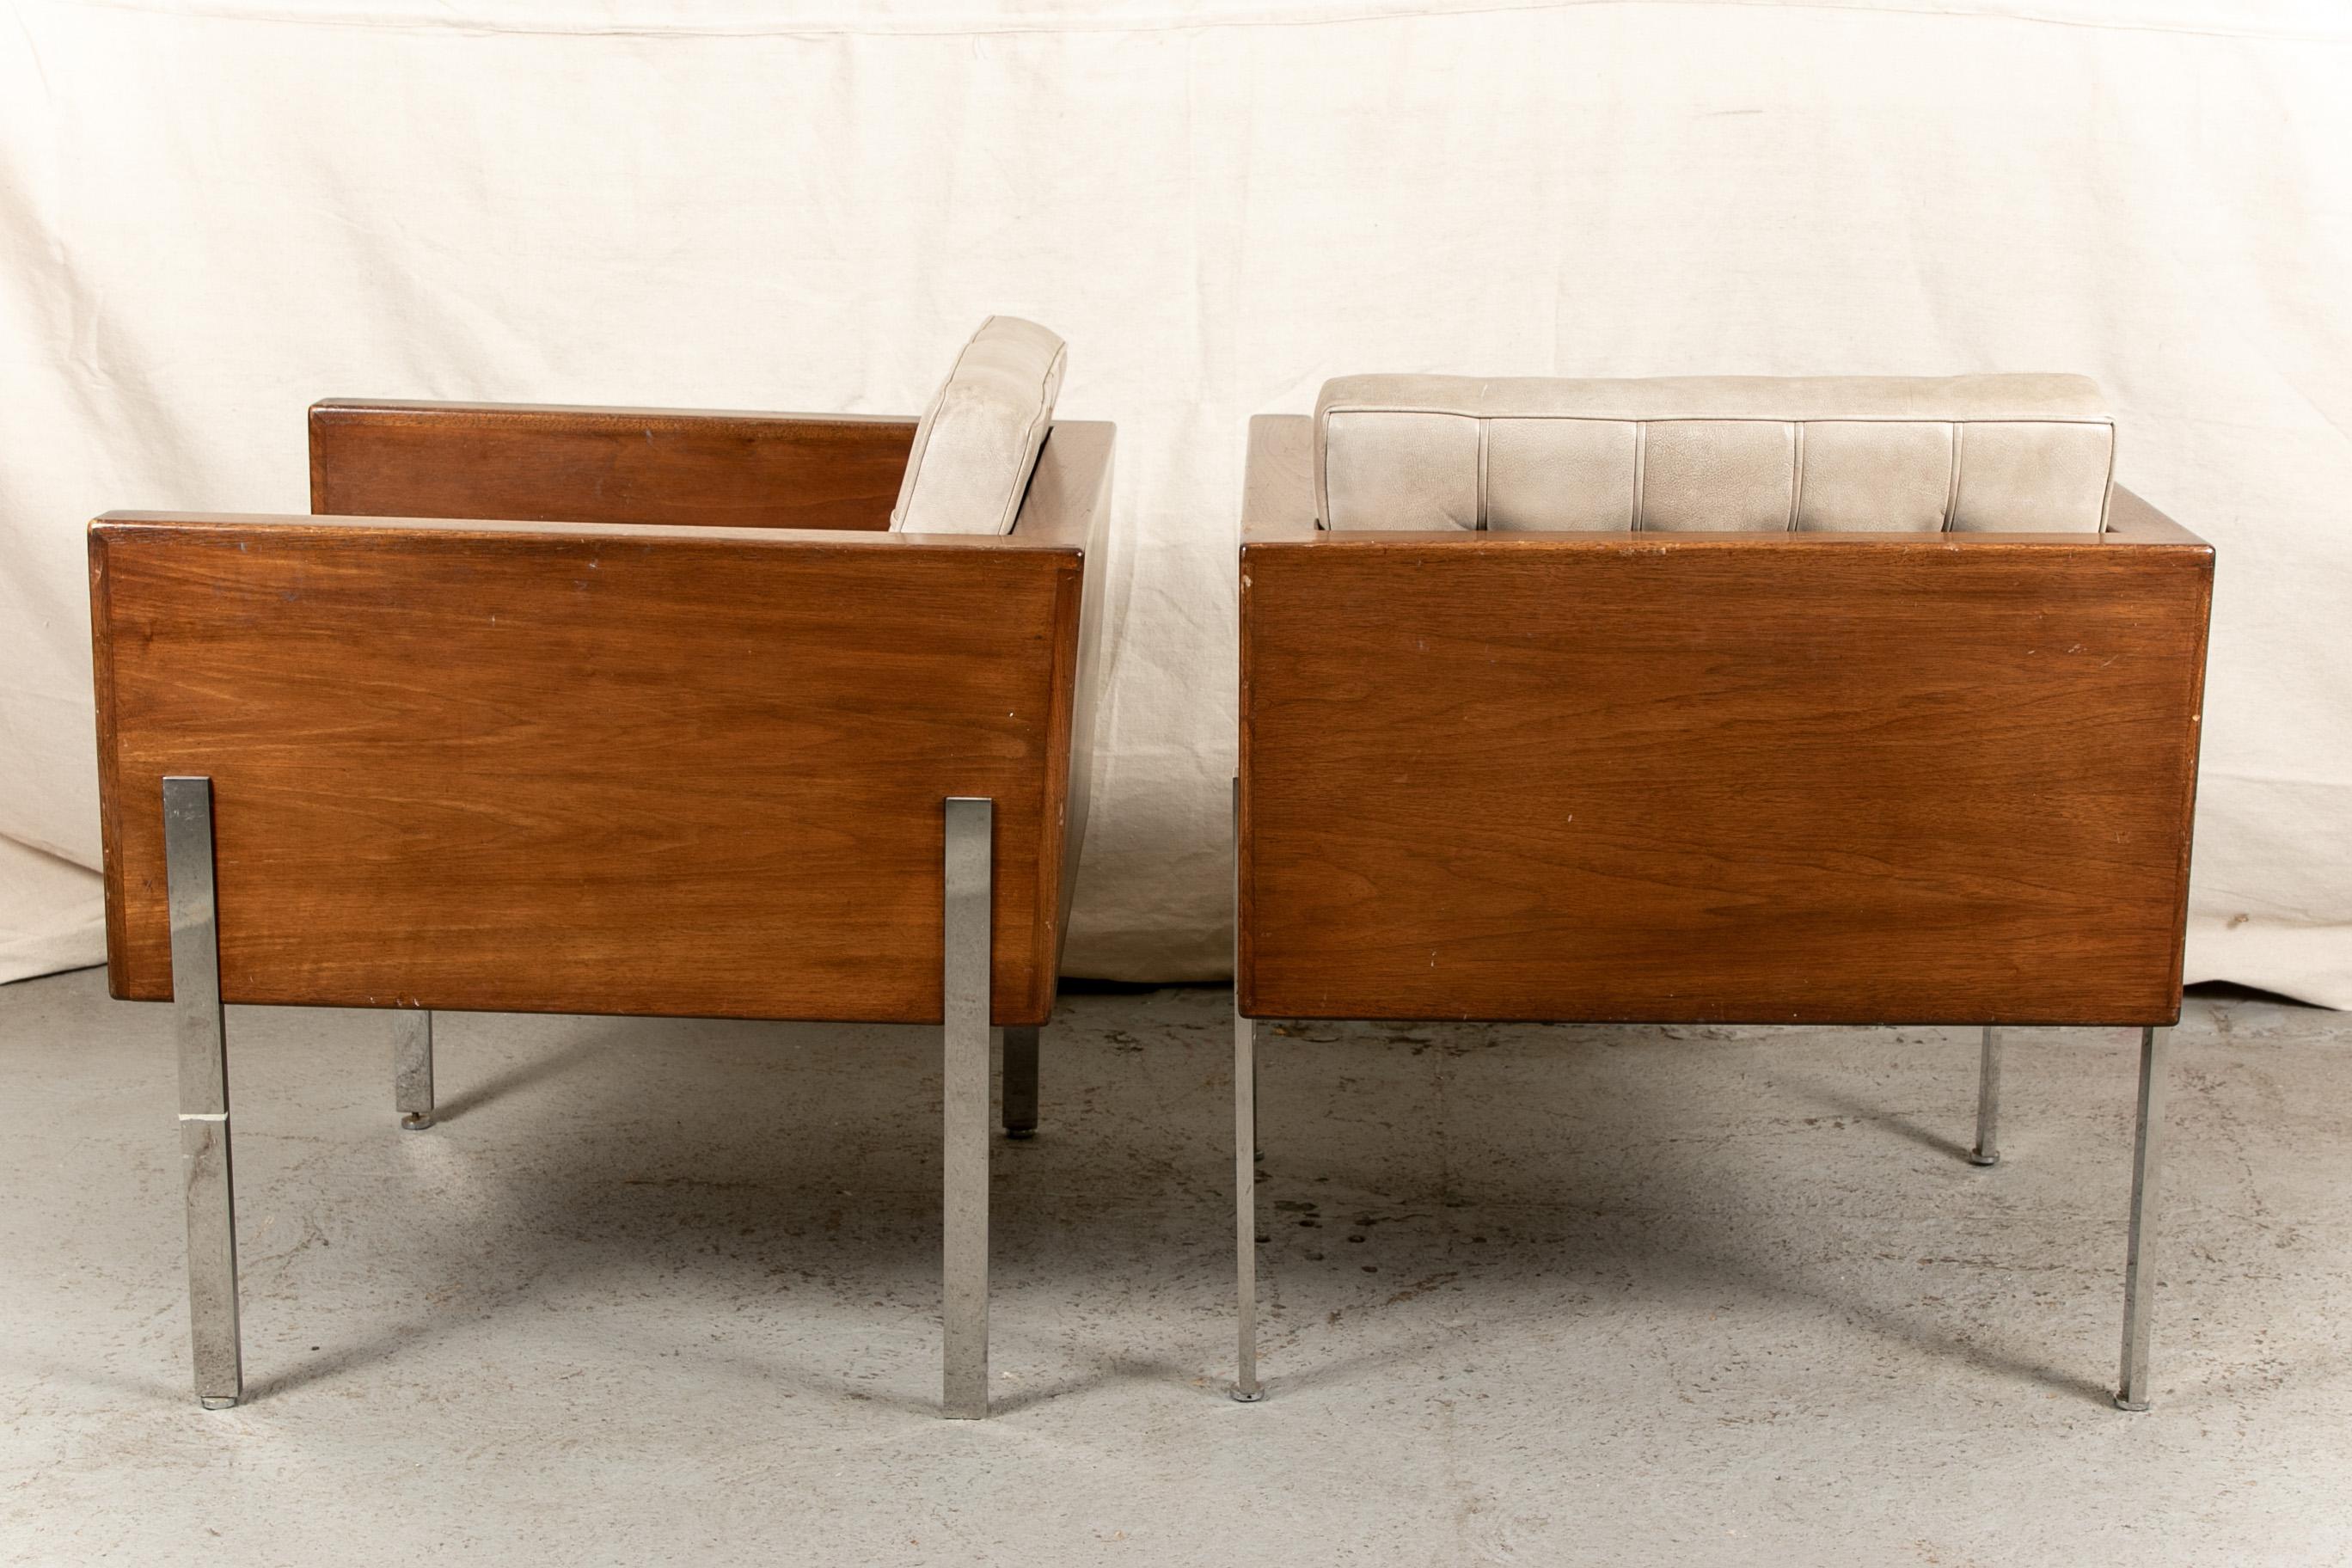 A pair of all original condition Cube chairs by Harvey Probber from his iconic Architectural Series. Square walnut frames with black leather backs with notches at the top. Flat chrome legs attached front and back on the sides of the frames. With